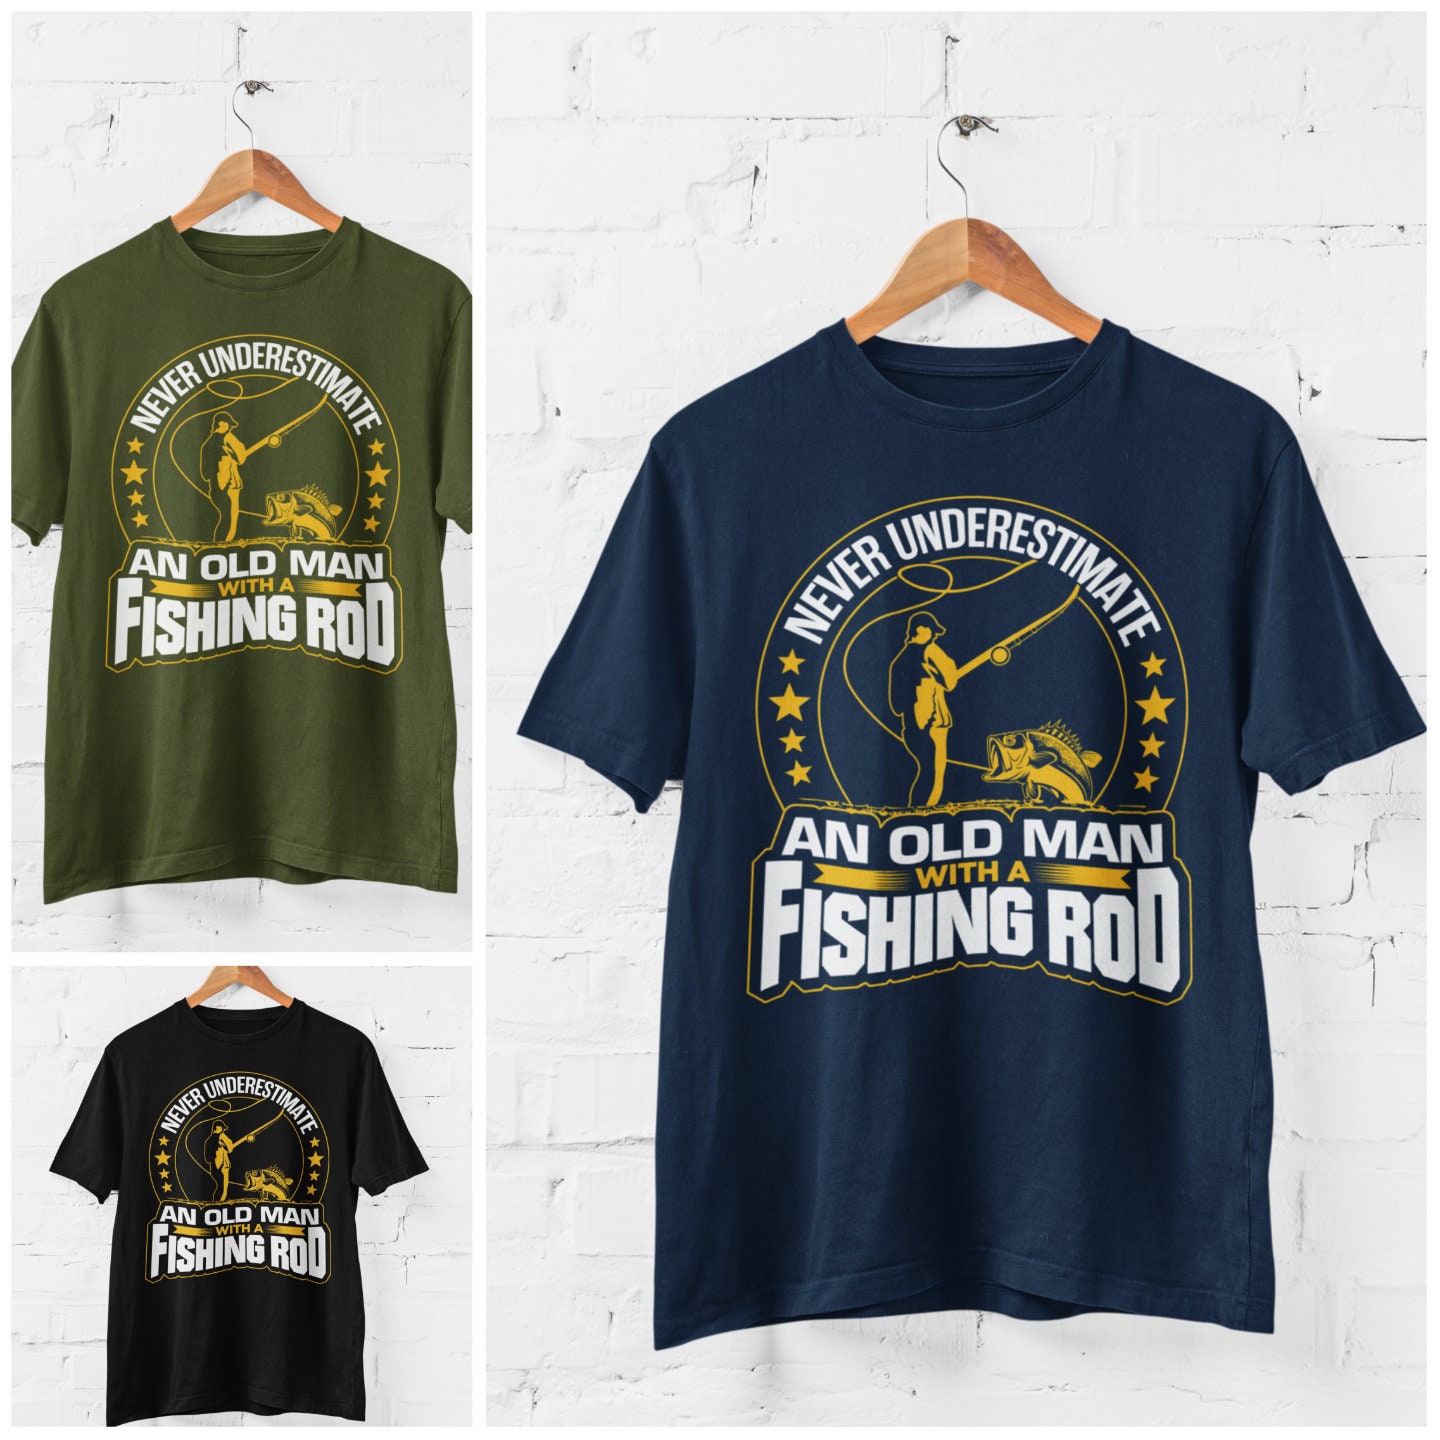 Never Underestimate An Old Man with A Fishing Rod Funny Fishing T Shirt Gift for Dad Grandpa Fisherman